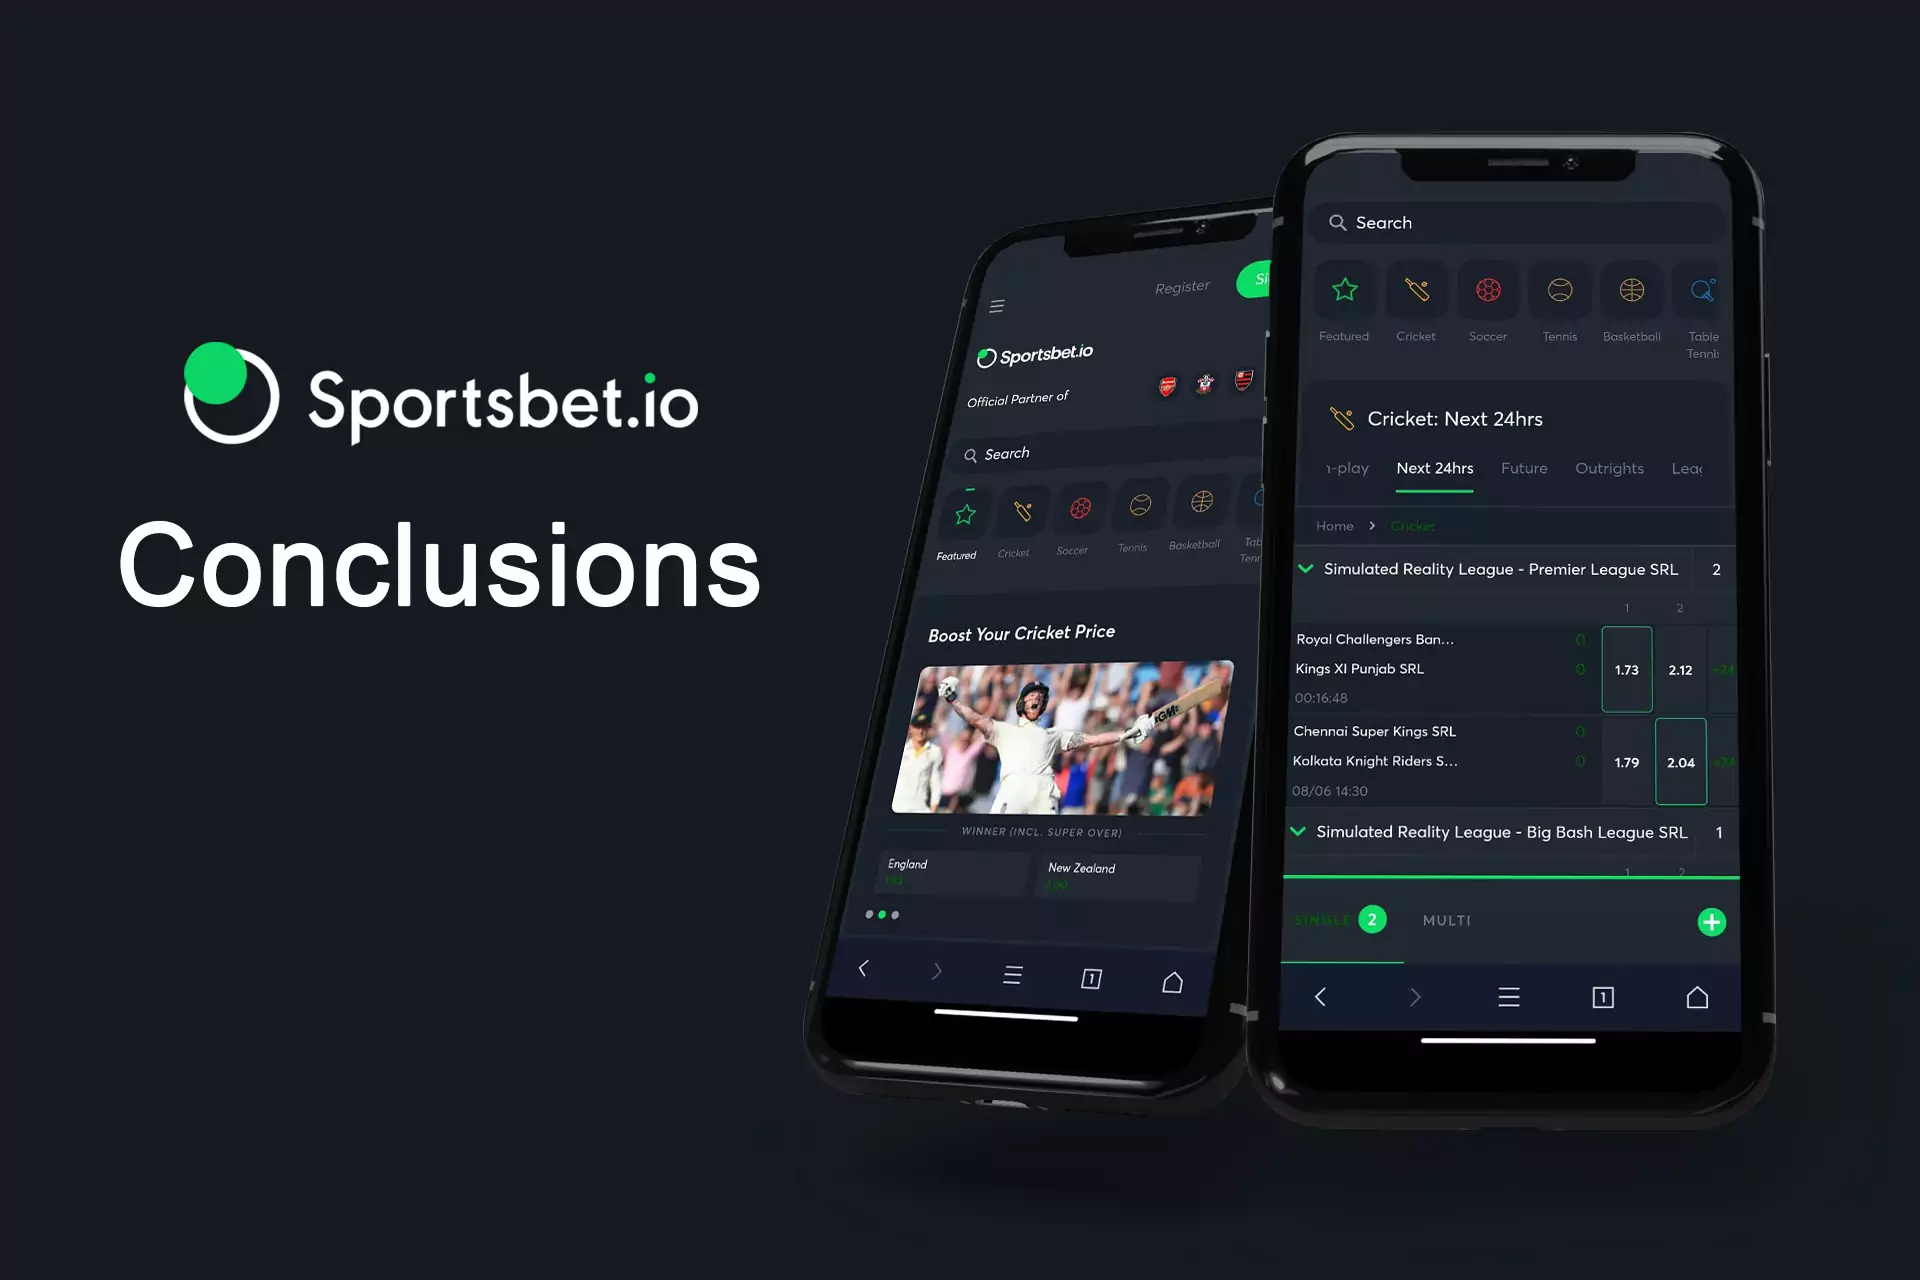 Read the conclusions about the quality of the Sportsbet.io app for Android and iOS.